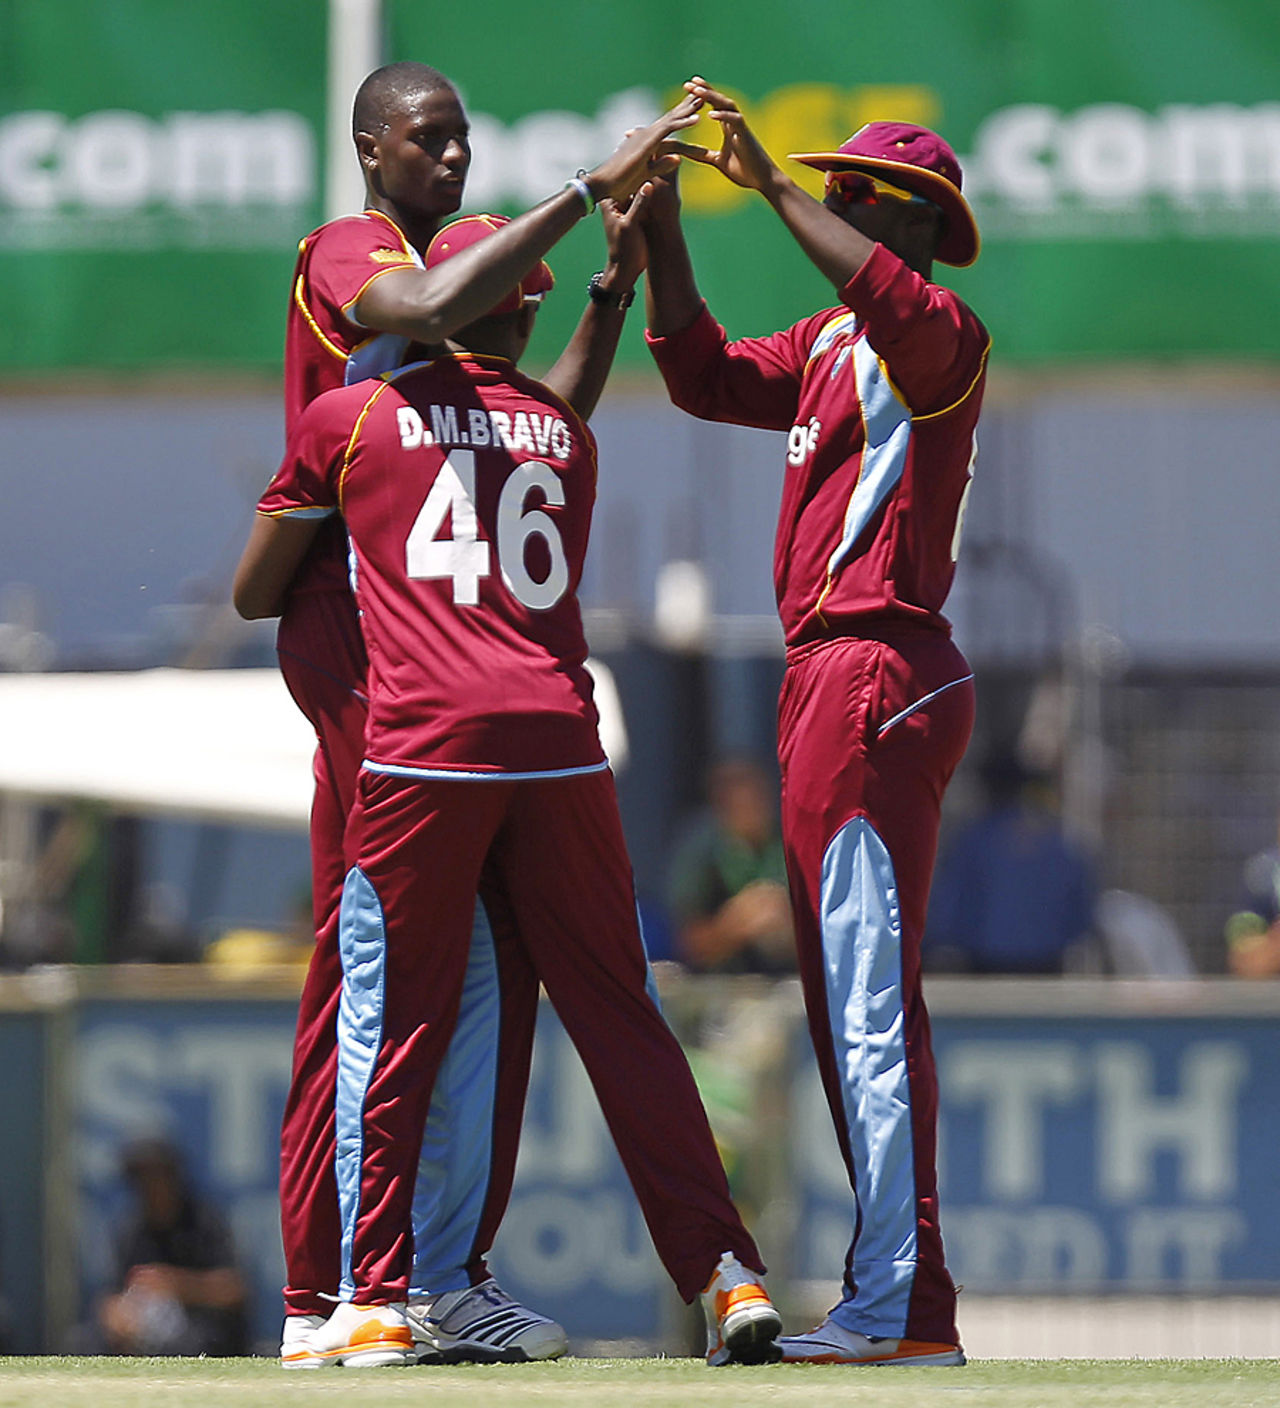 Jason Holder took the only Australian wicket to fall, Australia v West Indies, 1st ODI, Perth, February 1, 2013